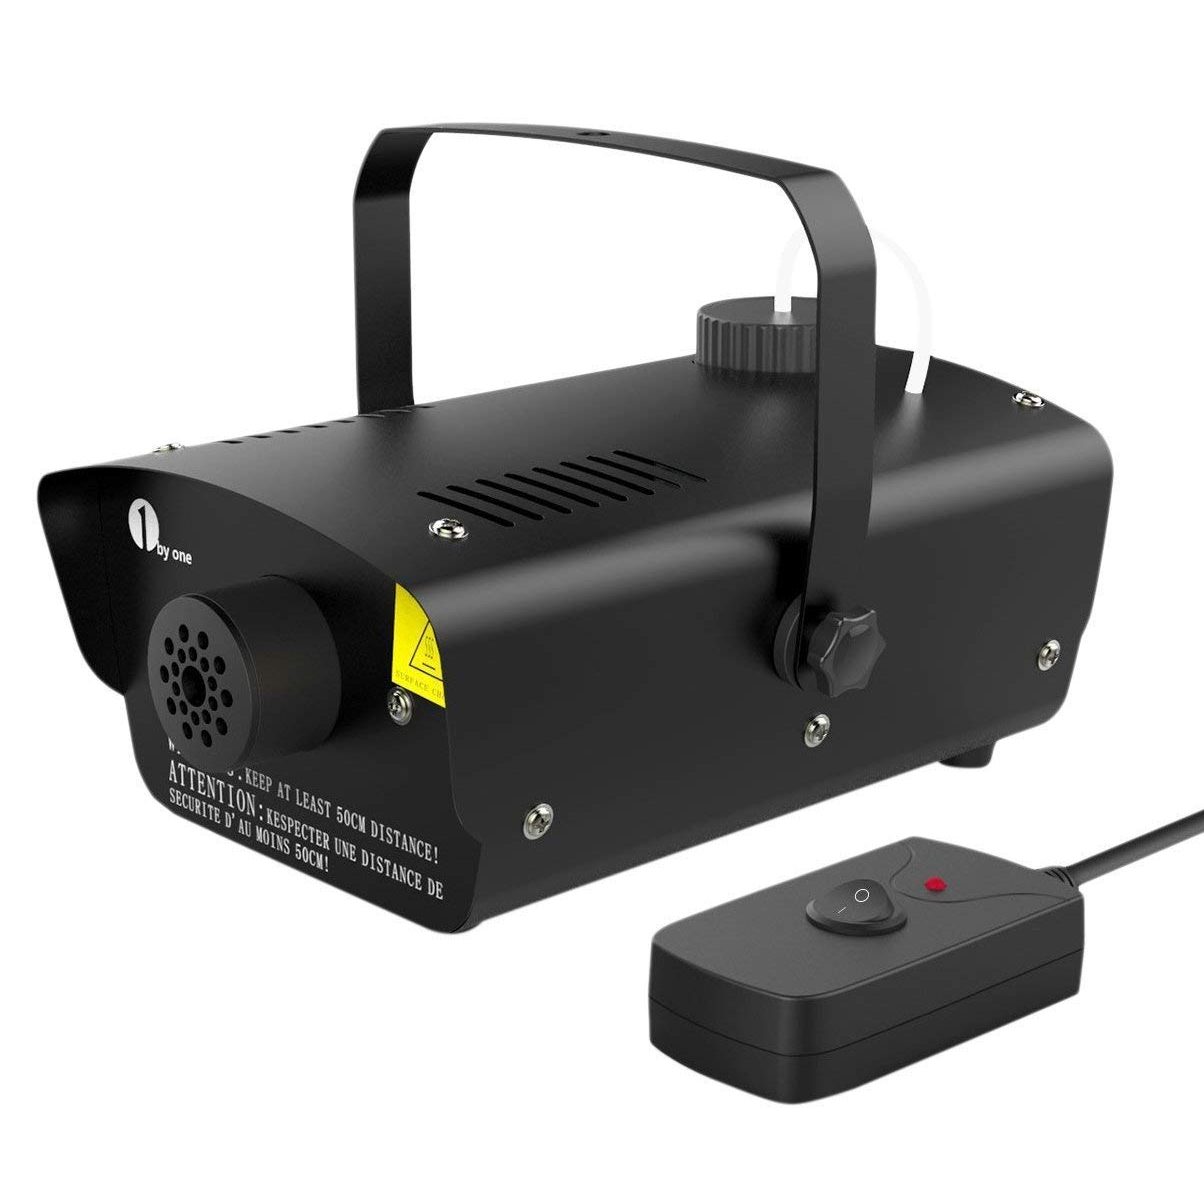 Halloween Fog Machine with Wired Remote Control Only $30.09 on Amazon!